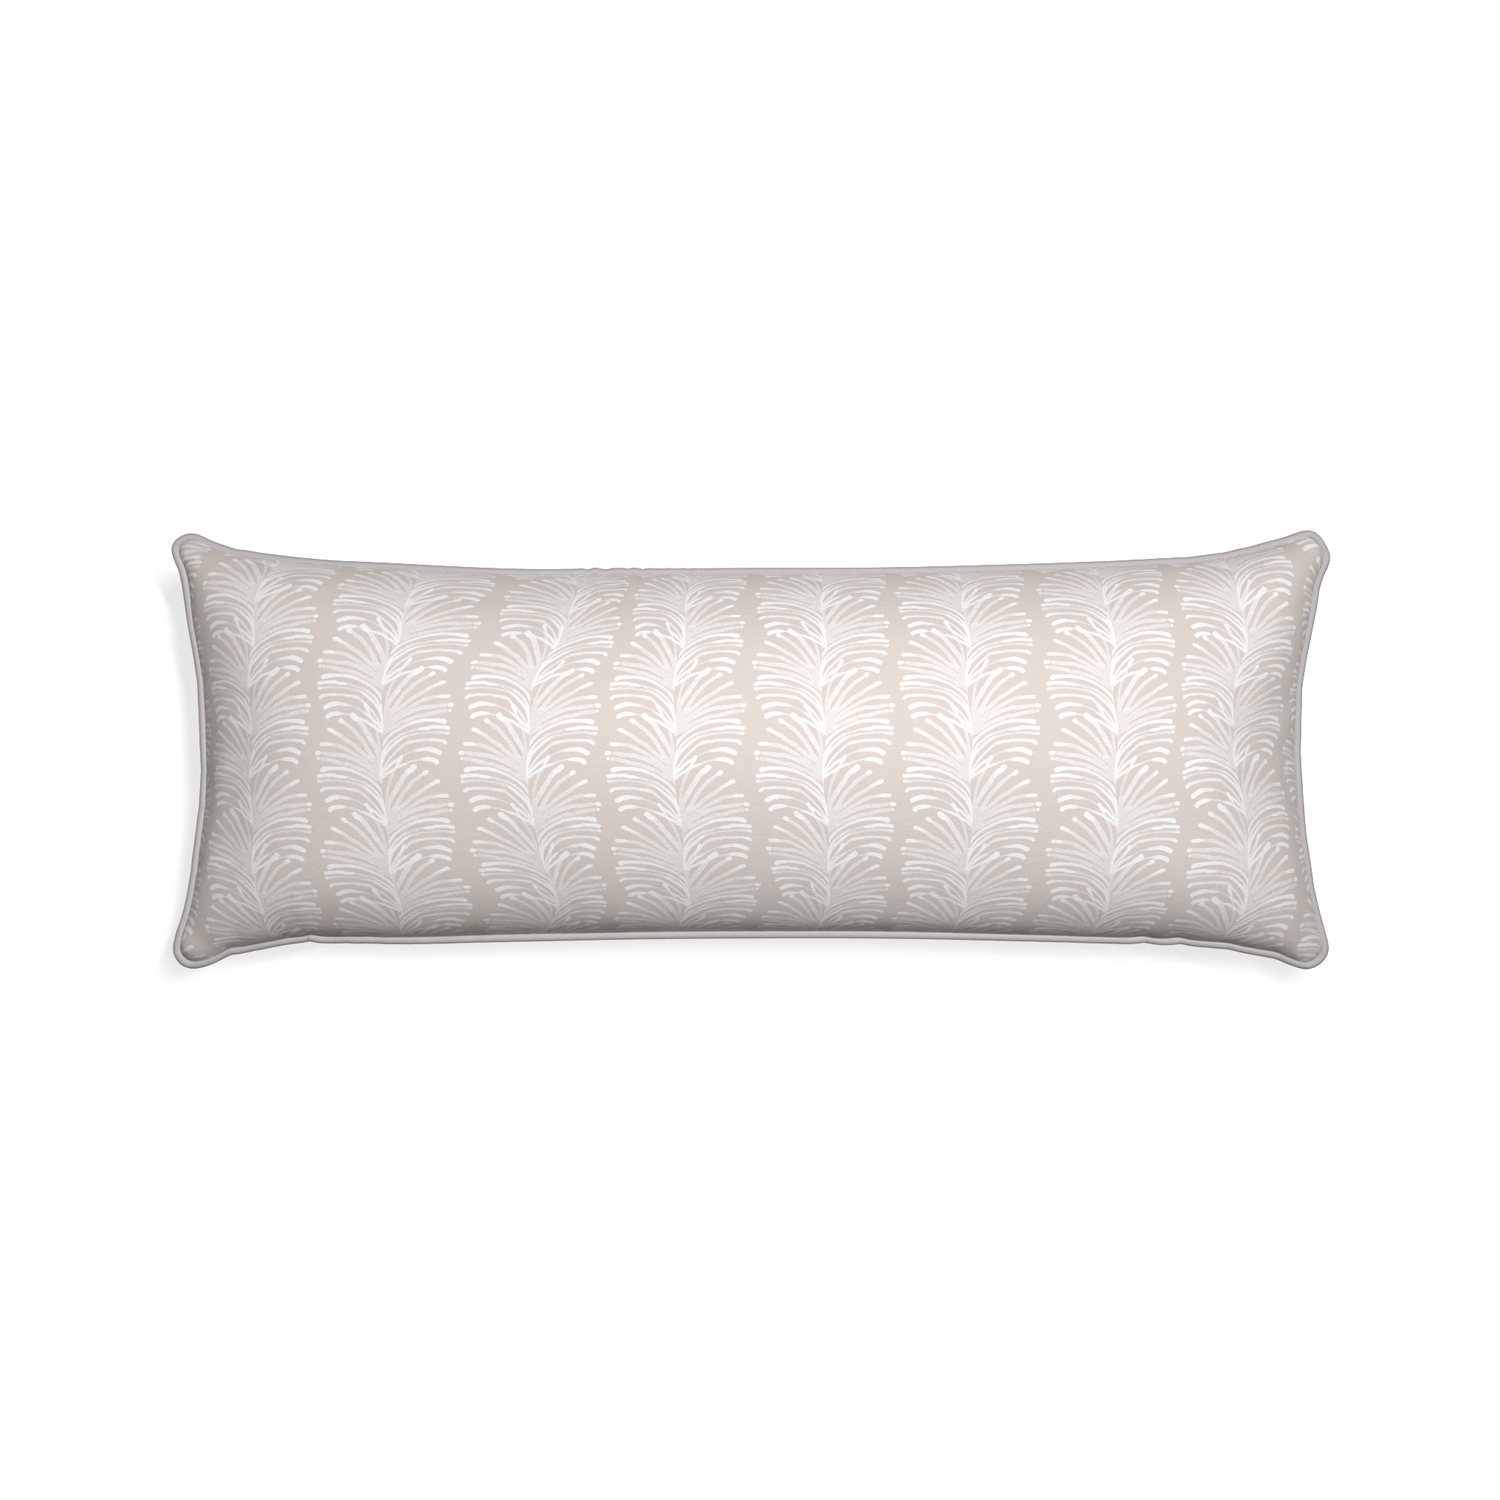 Xl-lumbar emma sand custom pillow with pebble piping on white background